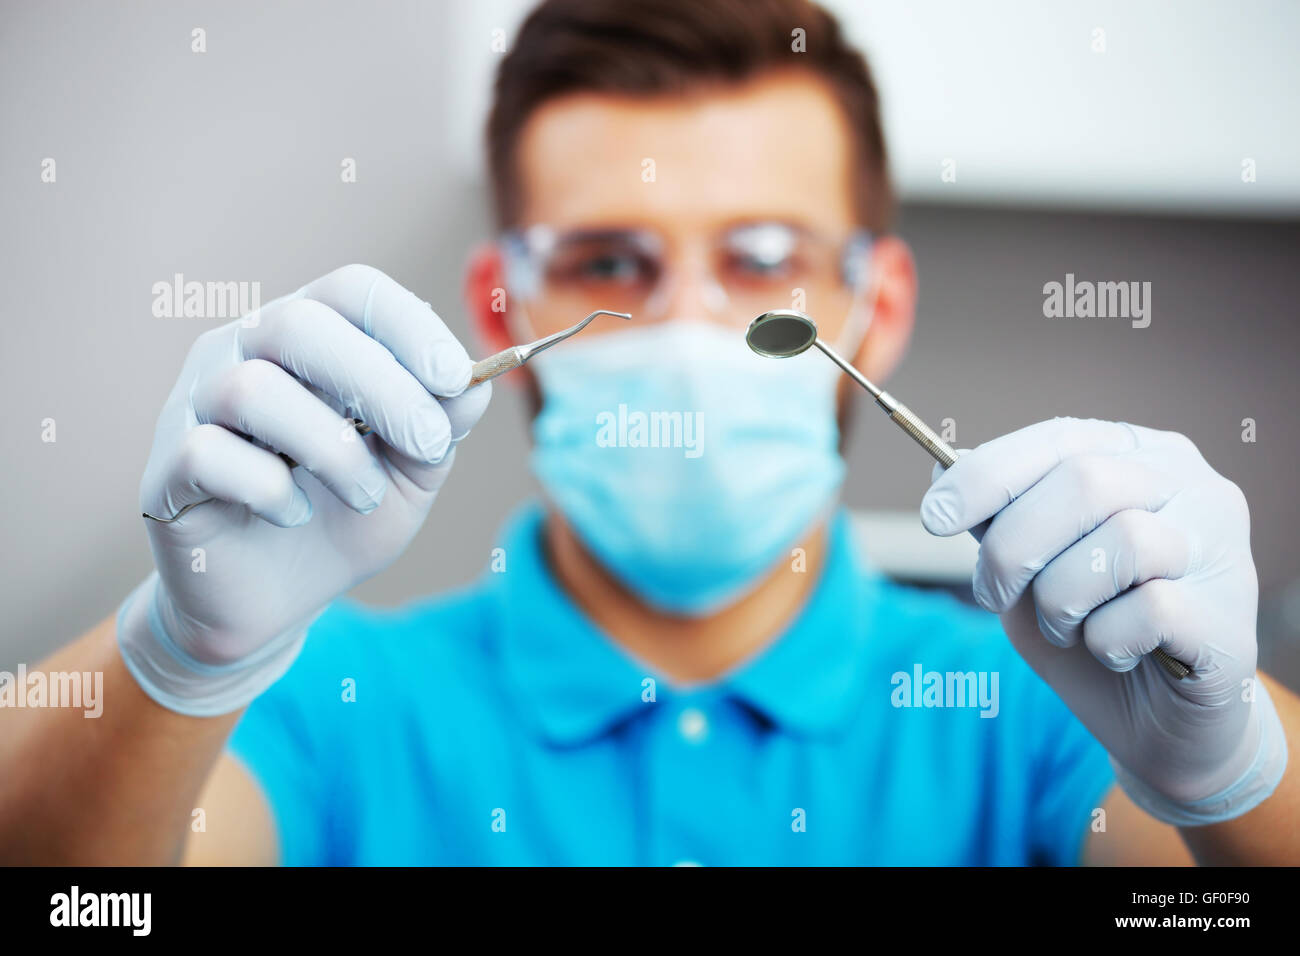 Dentist in mask and protective eyeglasses ready to start dental checkup. Focus on hands. Stock Photo